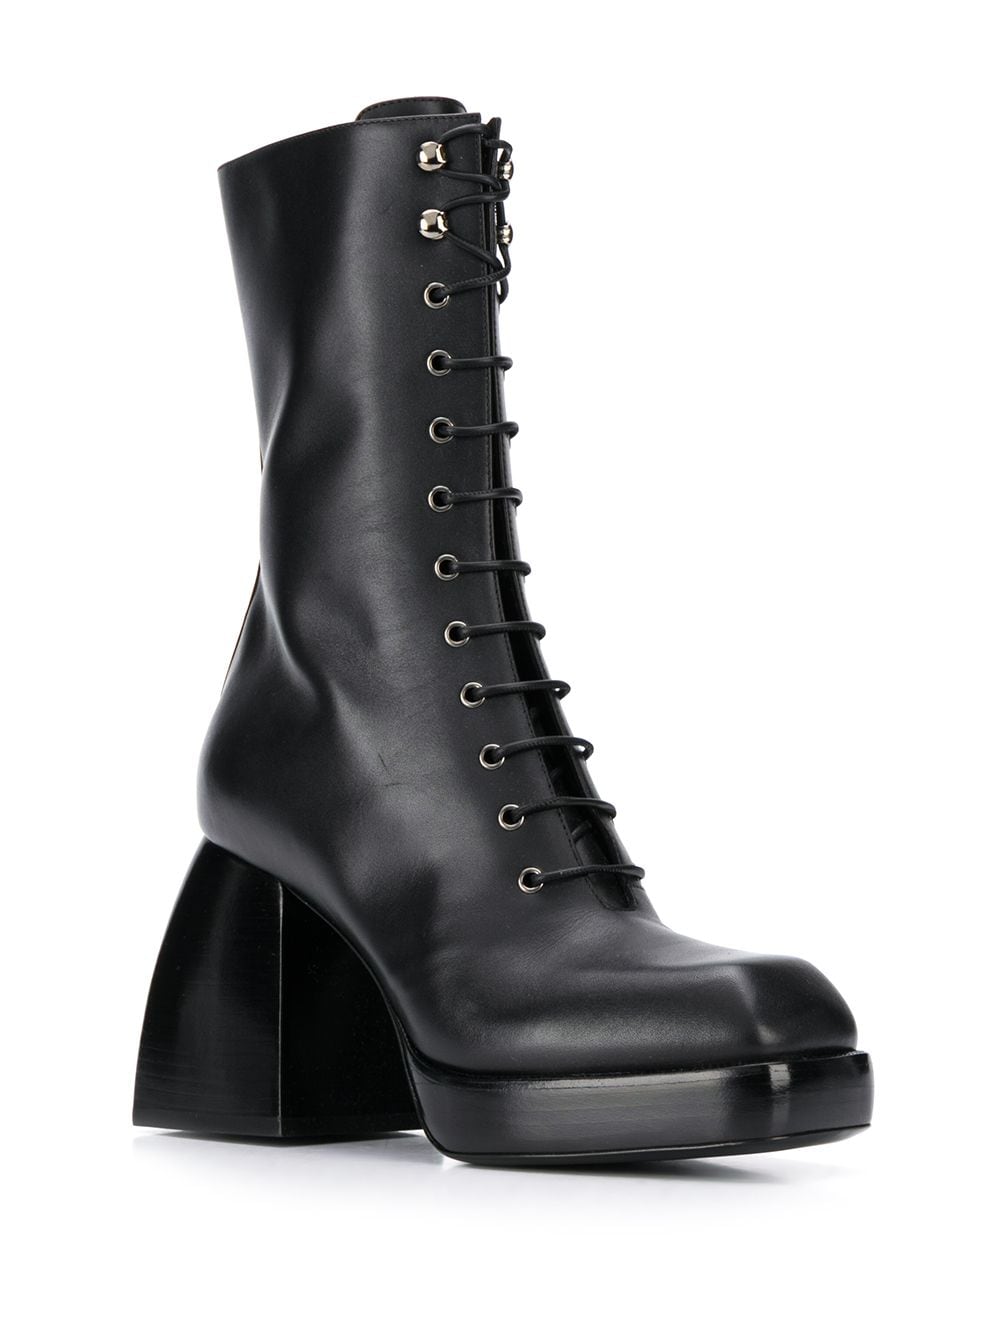 Image 2 of Nodaleto lace-up high heel boots